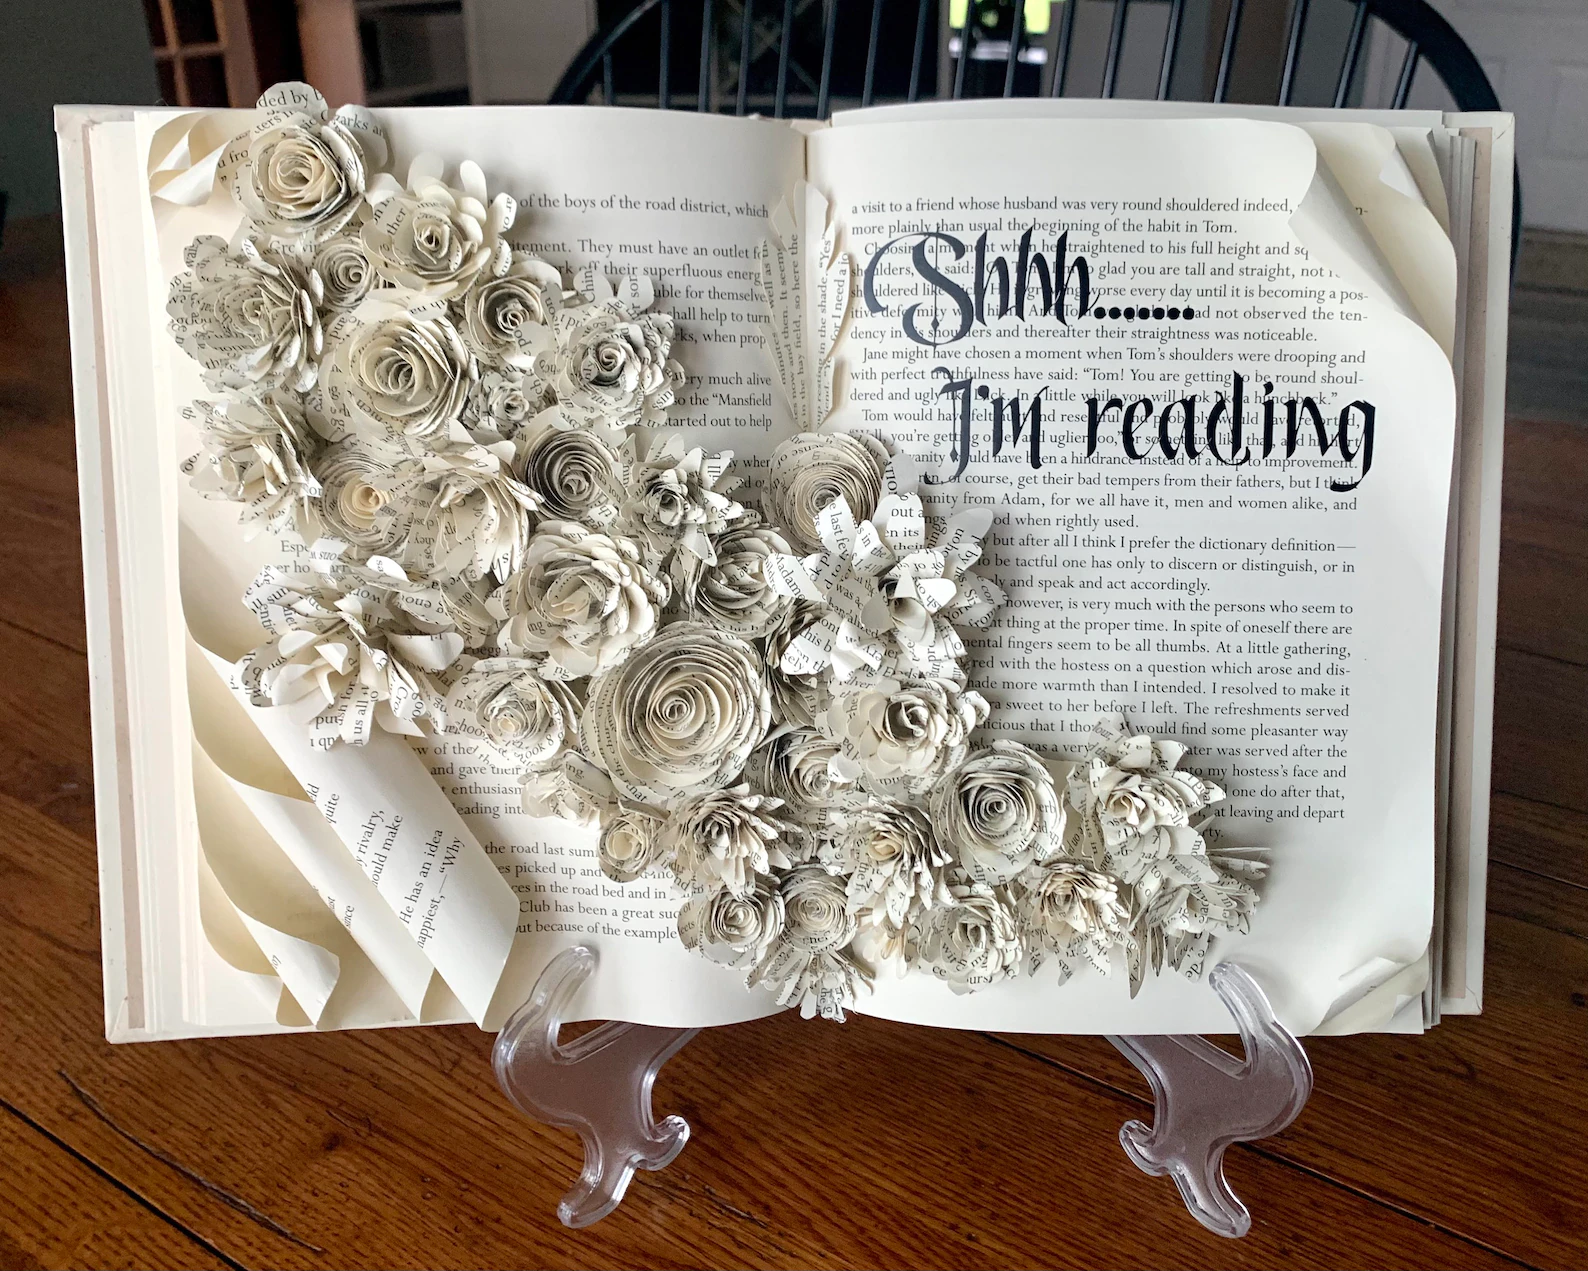 An old book opened to a sculpture of florals made of old pages.